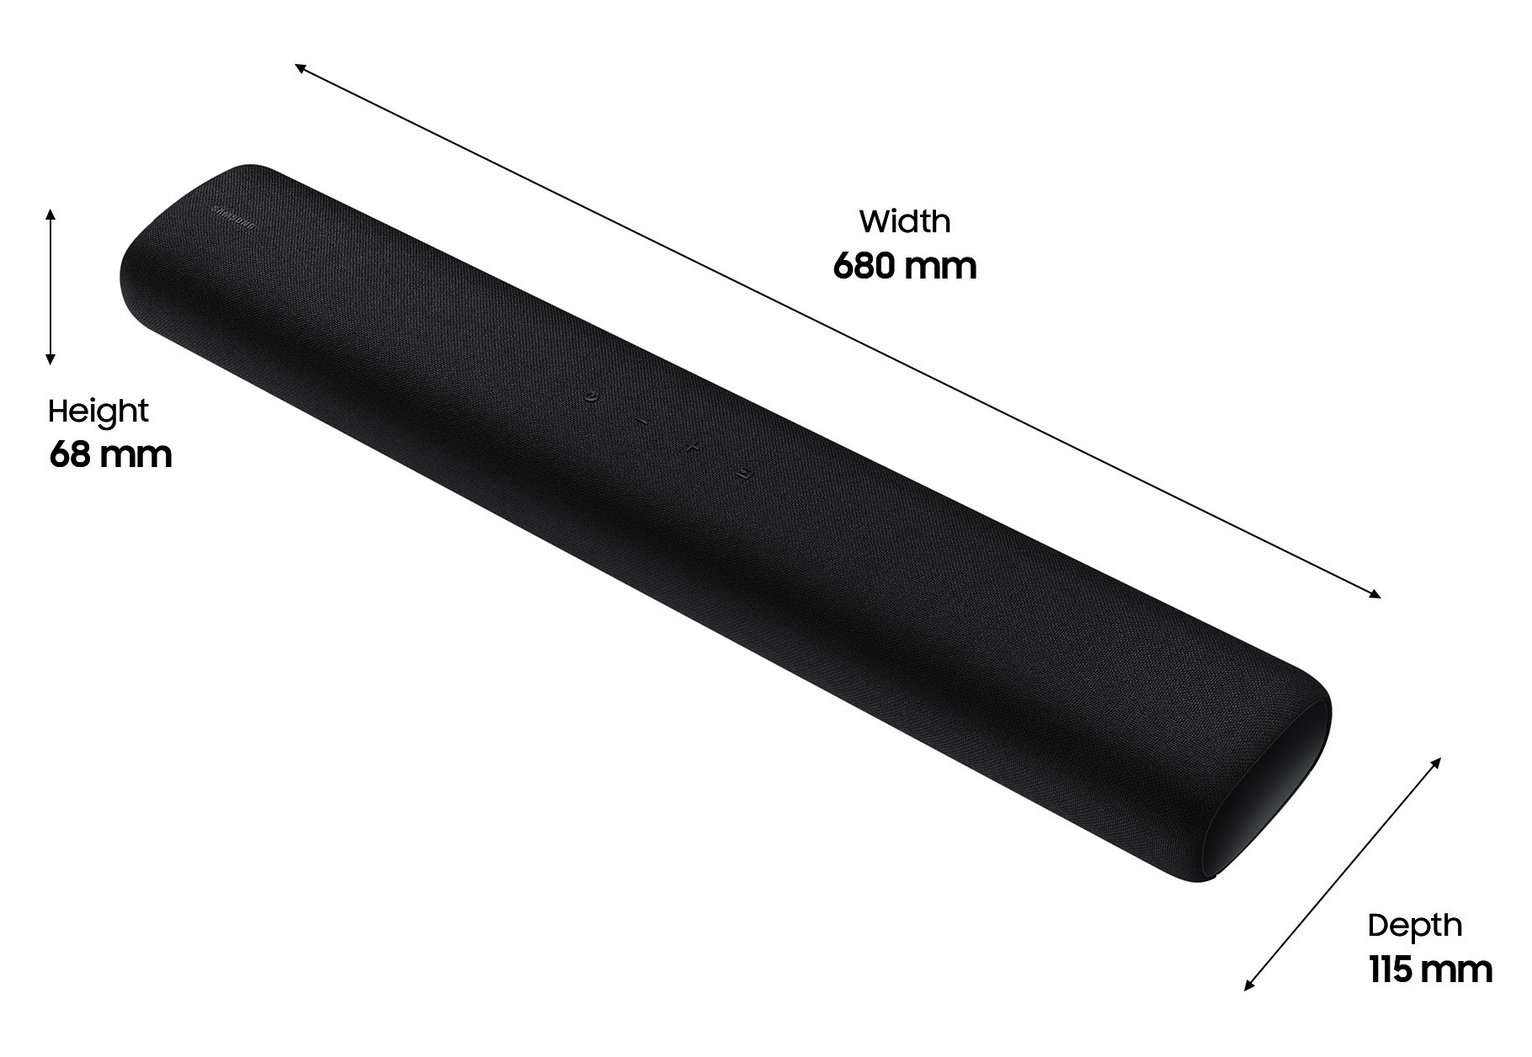 Samsung HW-S40T 2Ch All-In-One Sound Bar Review